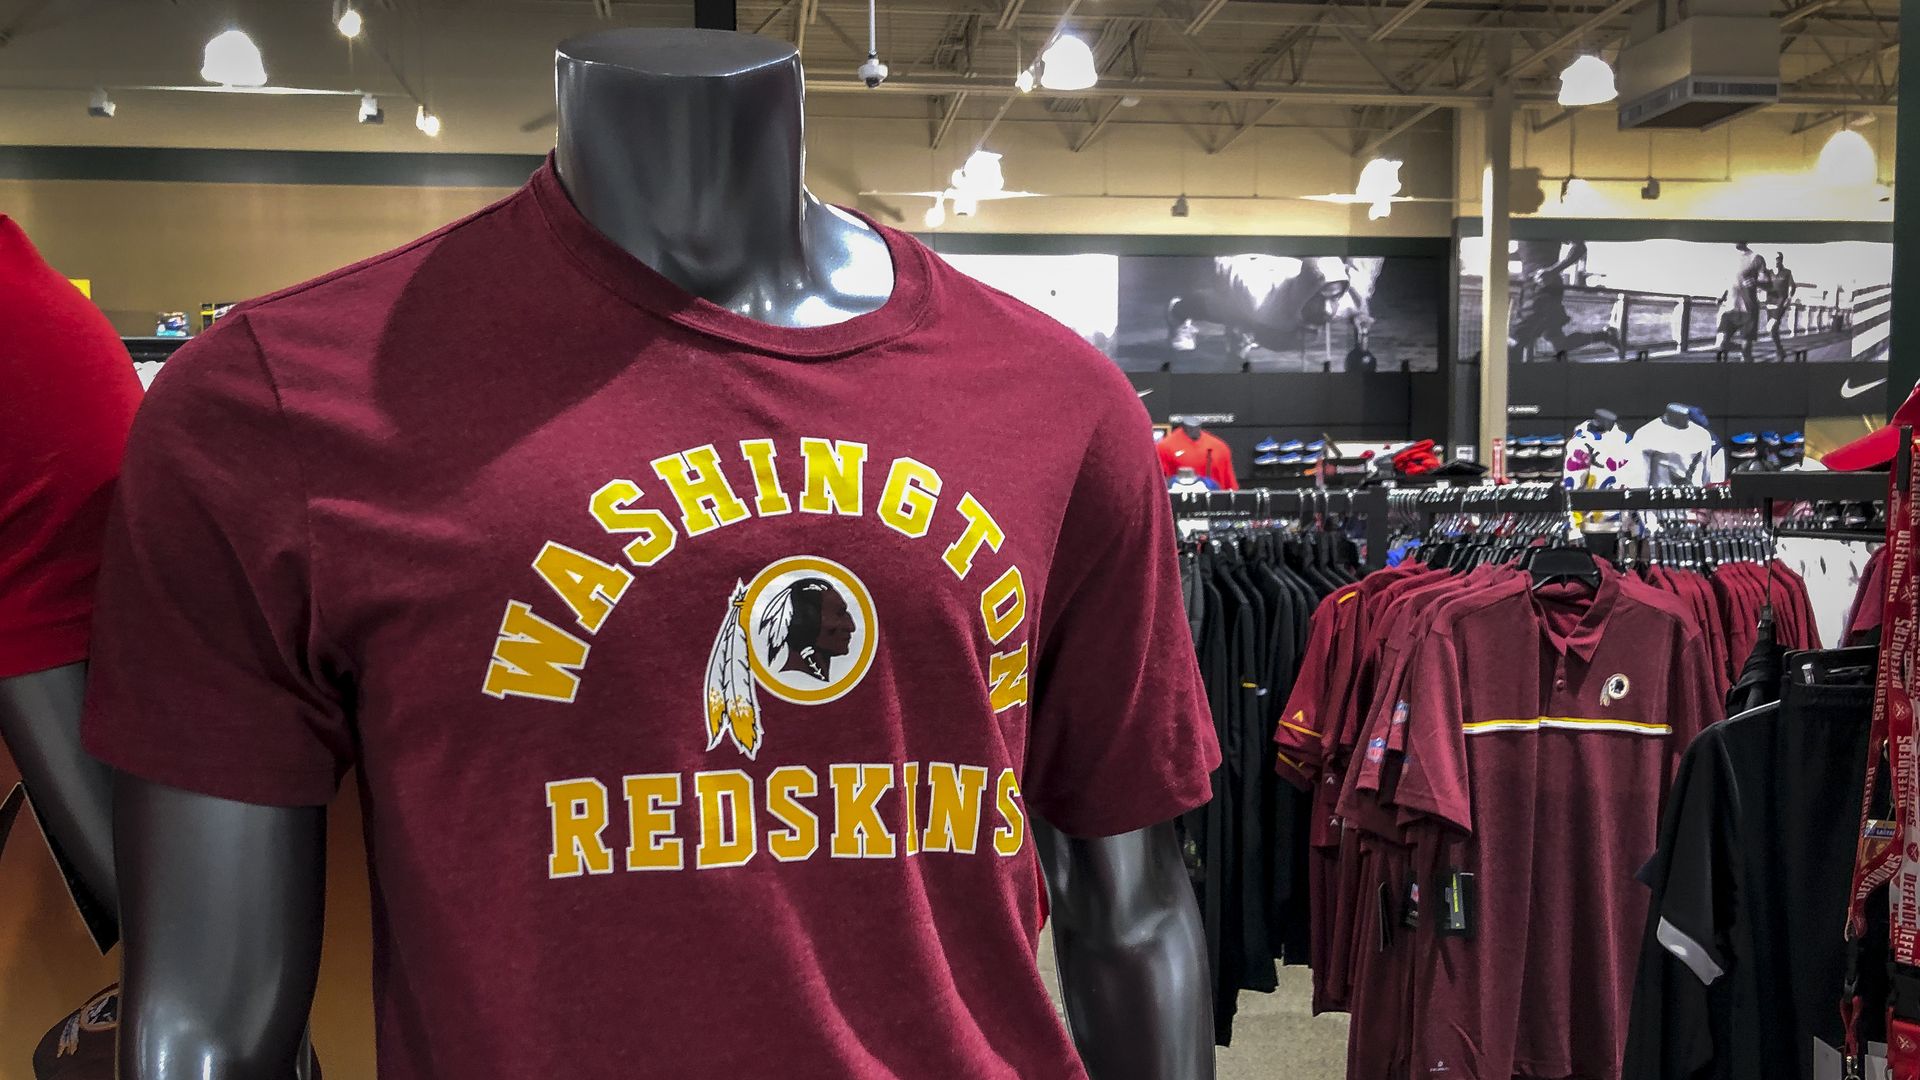 A T shirt with the Washington Redskins logo on it 